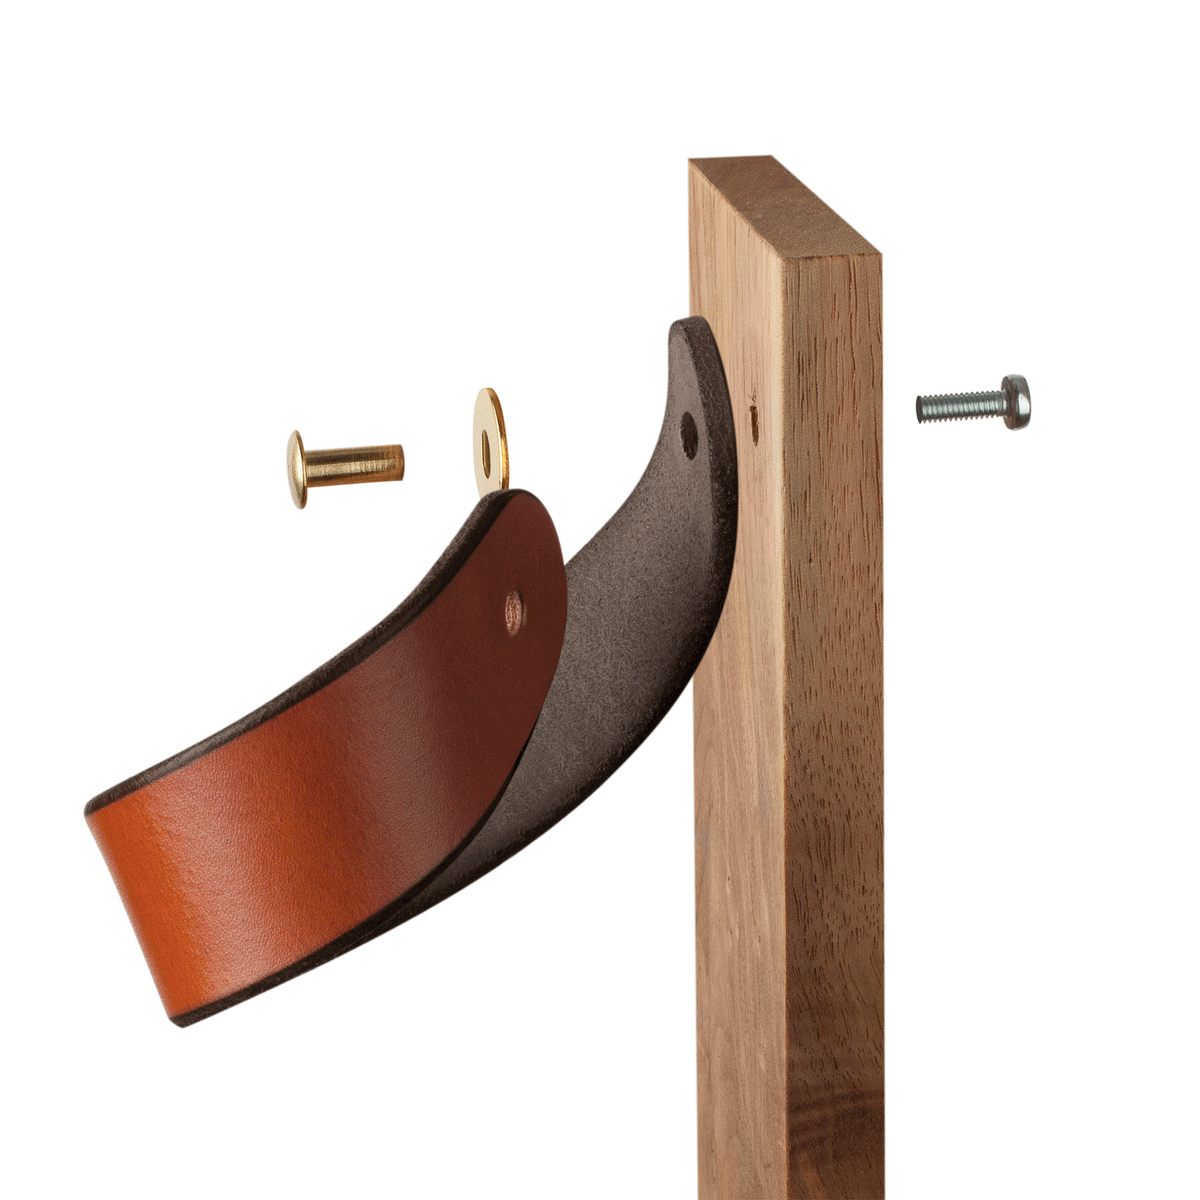 Leather and Wood Handle - The Sellwood - 2 Sizes